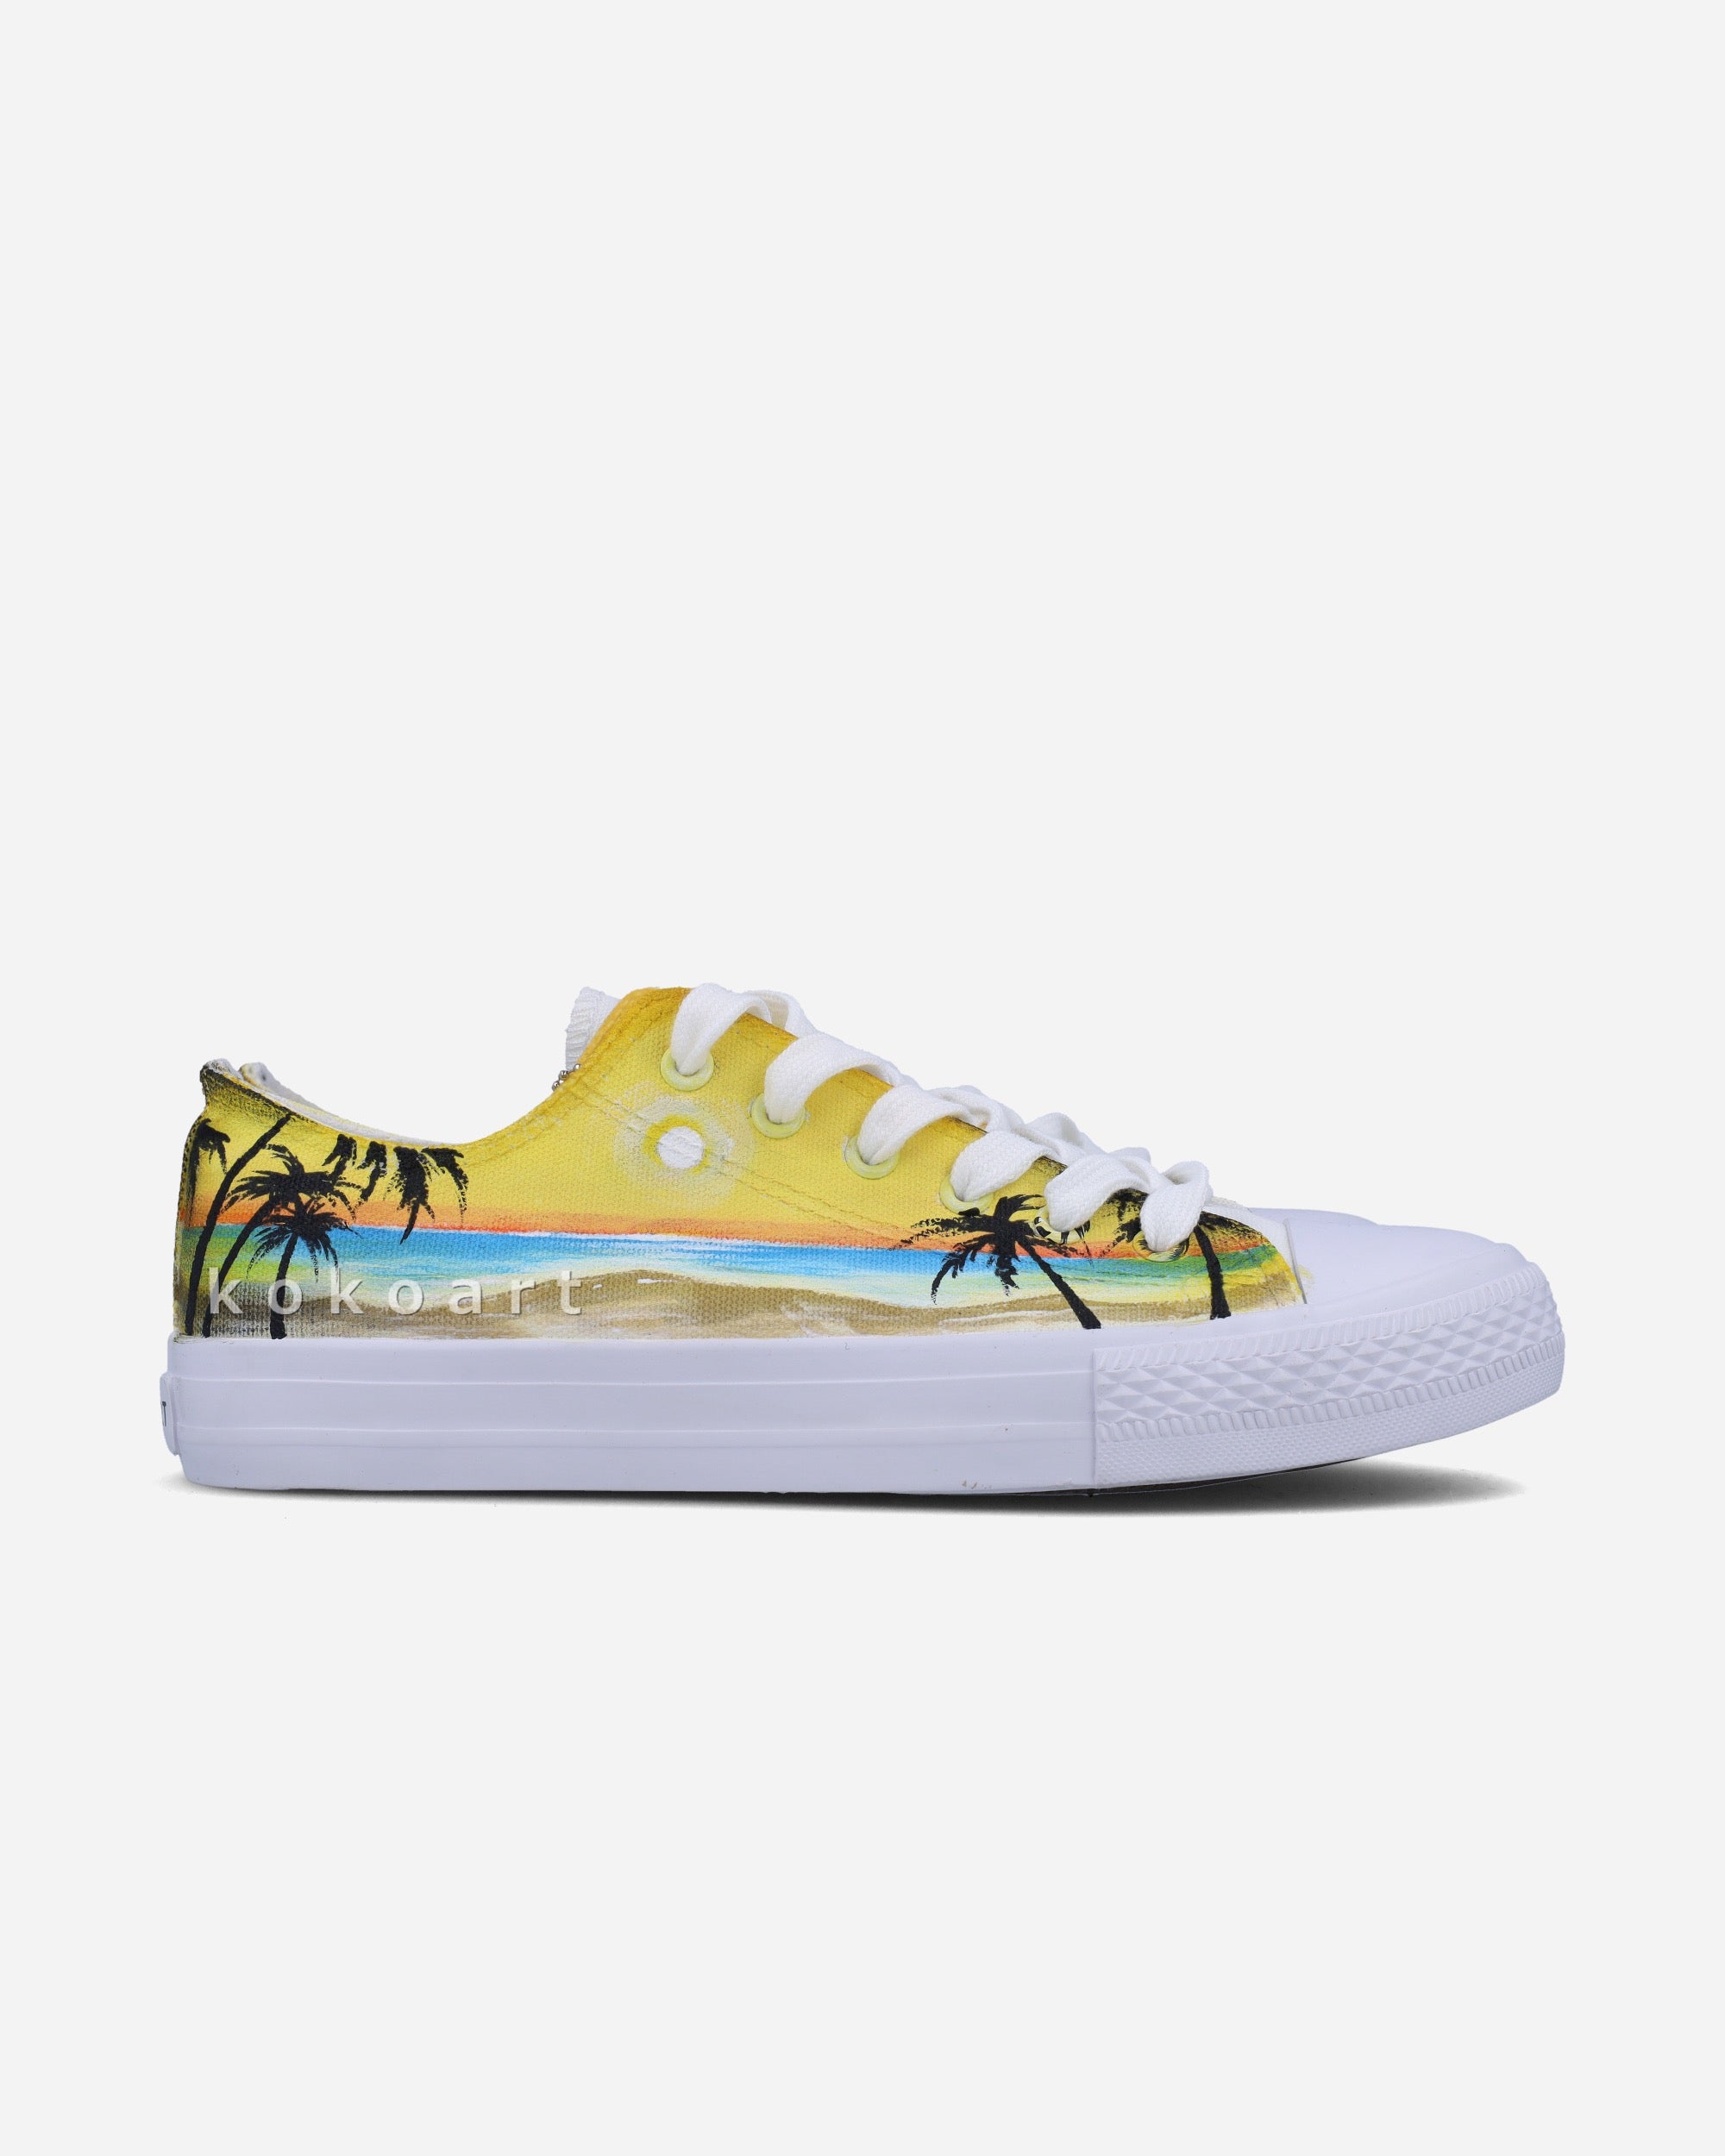 Sunset Beach with Palm Trees Hand Painted Shoes - KOKO ART